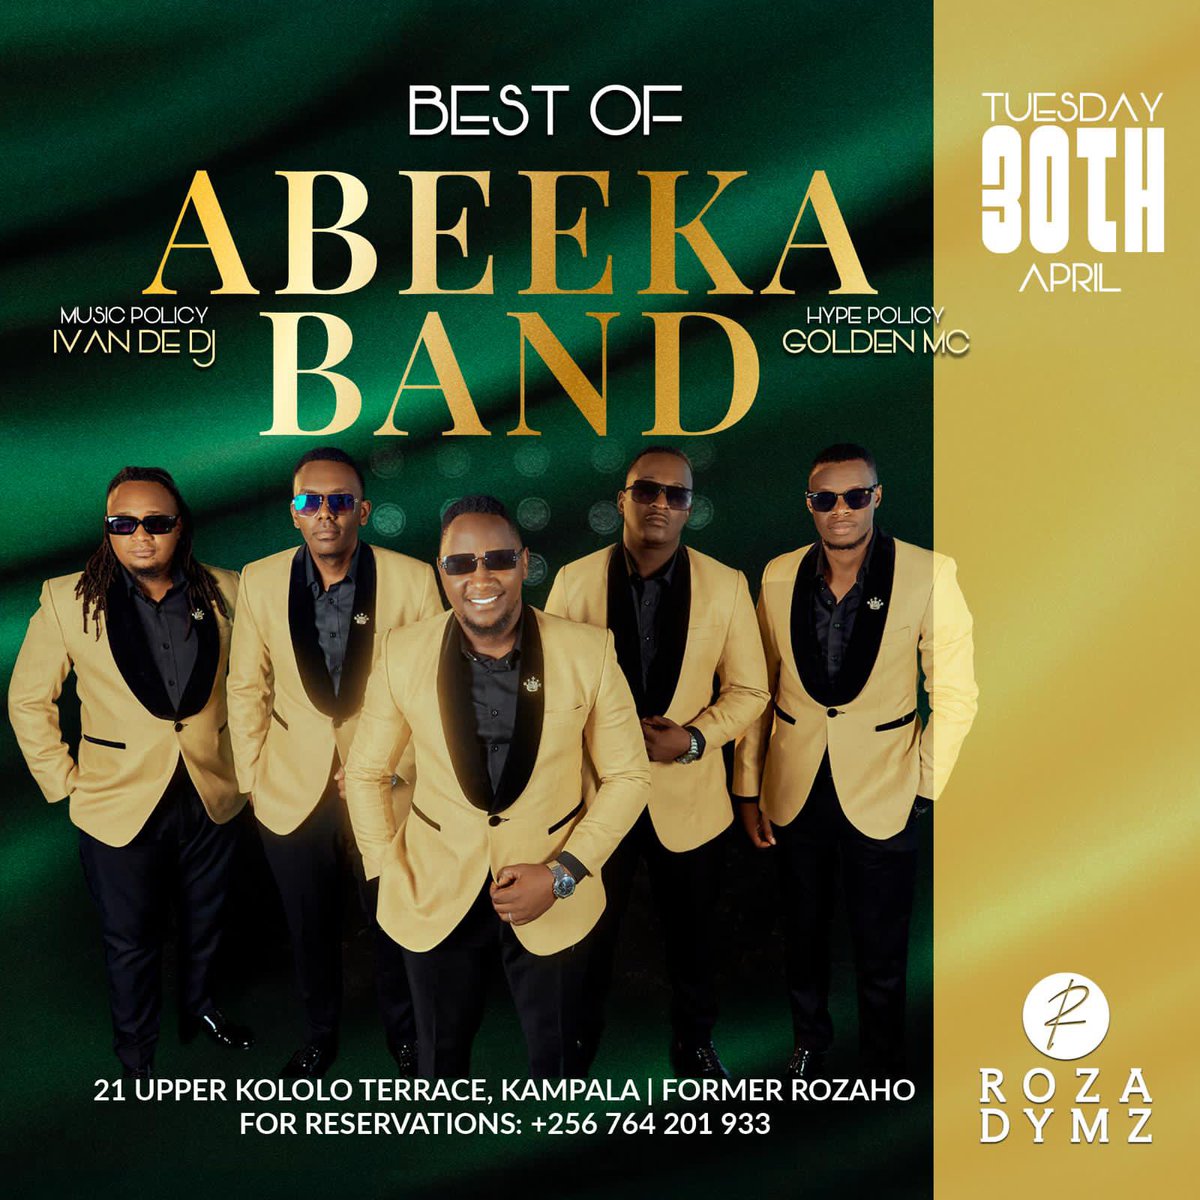 A brand new week with something special every Tuesday! We are bringing you the finest @Abeeka_band tomorrow night. For Reservations: +256 764 201 933 📍21 Upper Kololo Terrace, Kampala